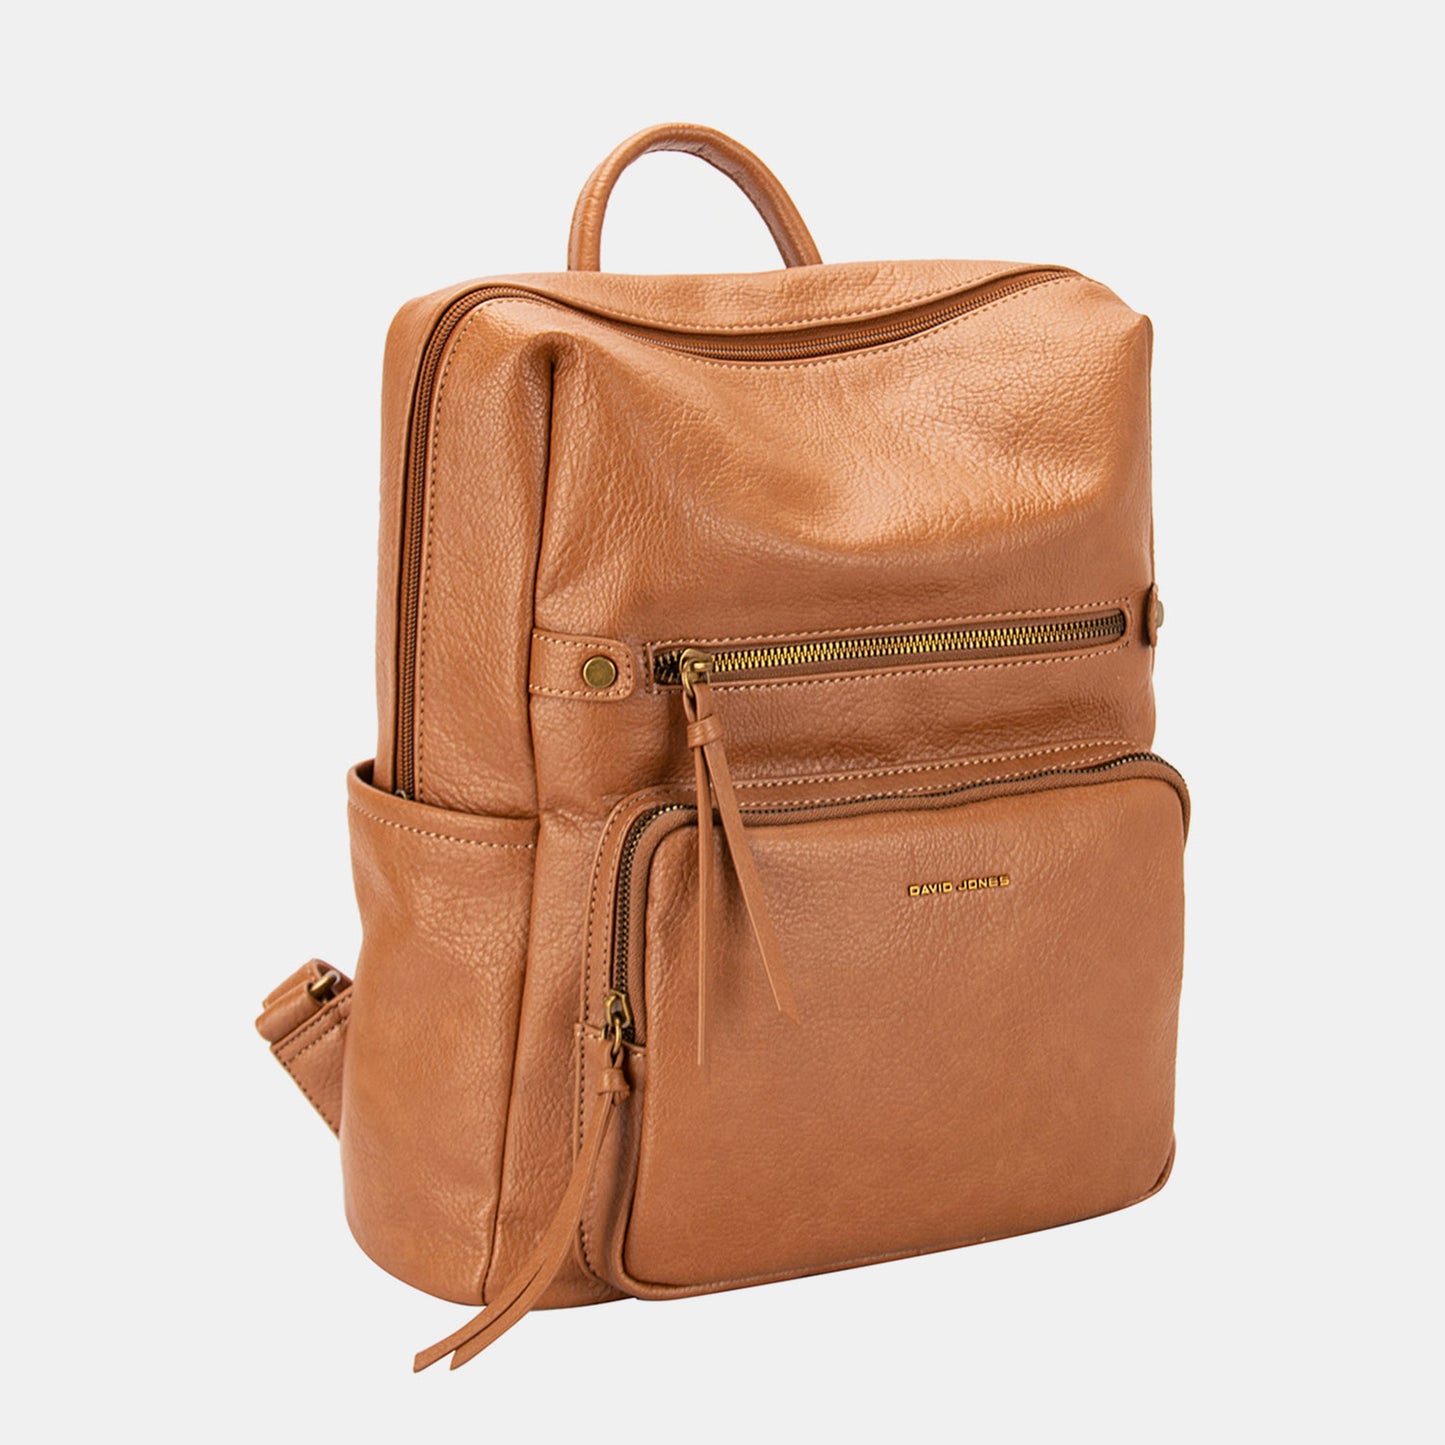 Foursquare Purse Backpack by David Jones